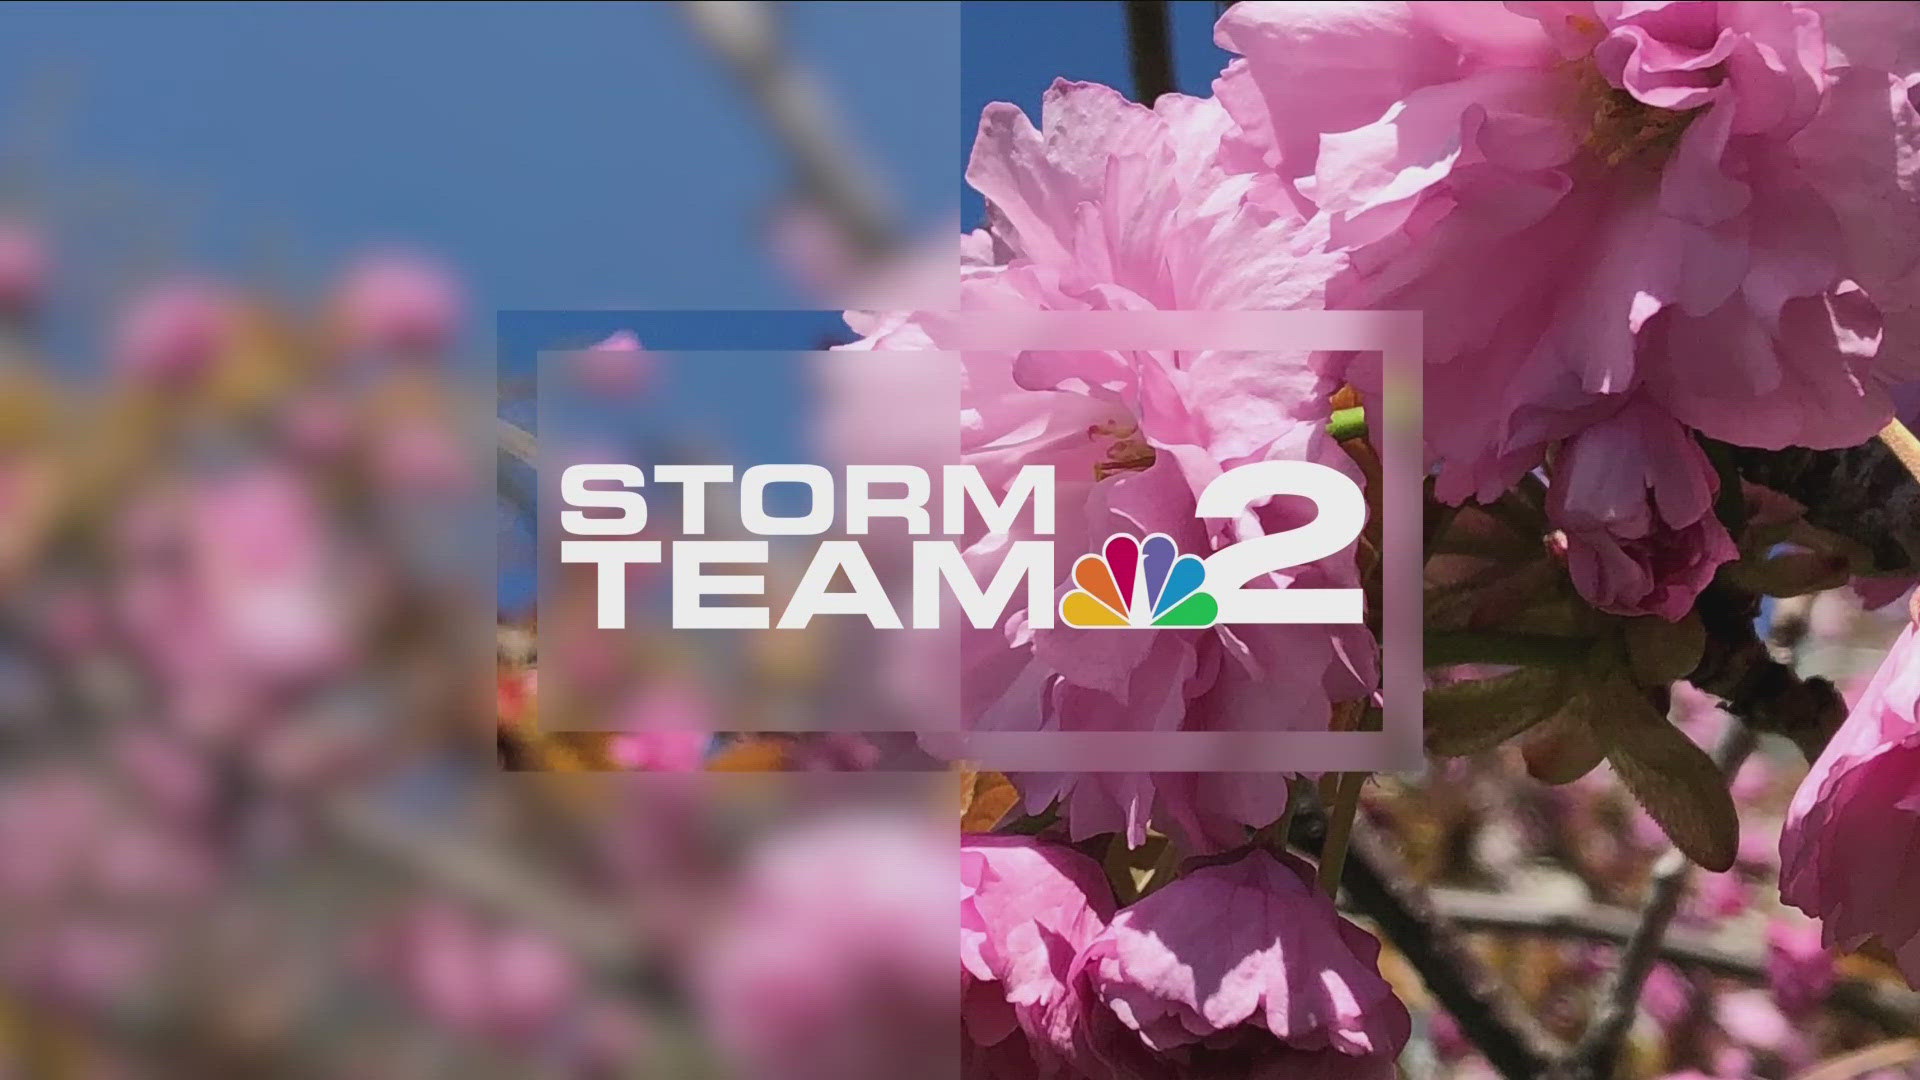 Storm Team 2 night forecast with Dan Russell for Friday, July 5.